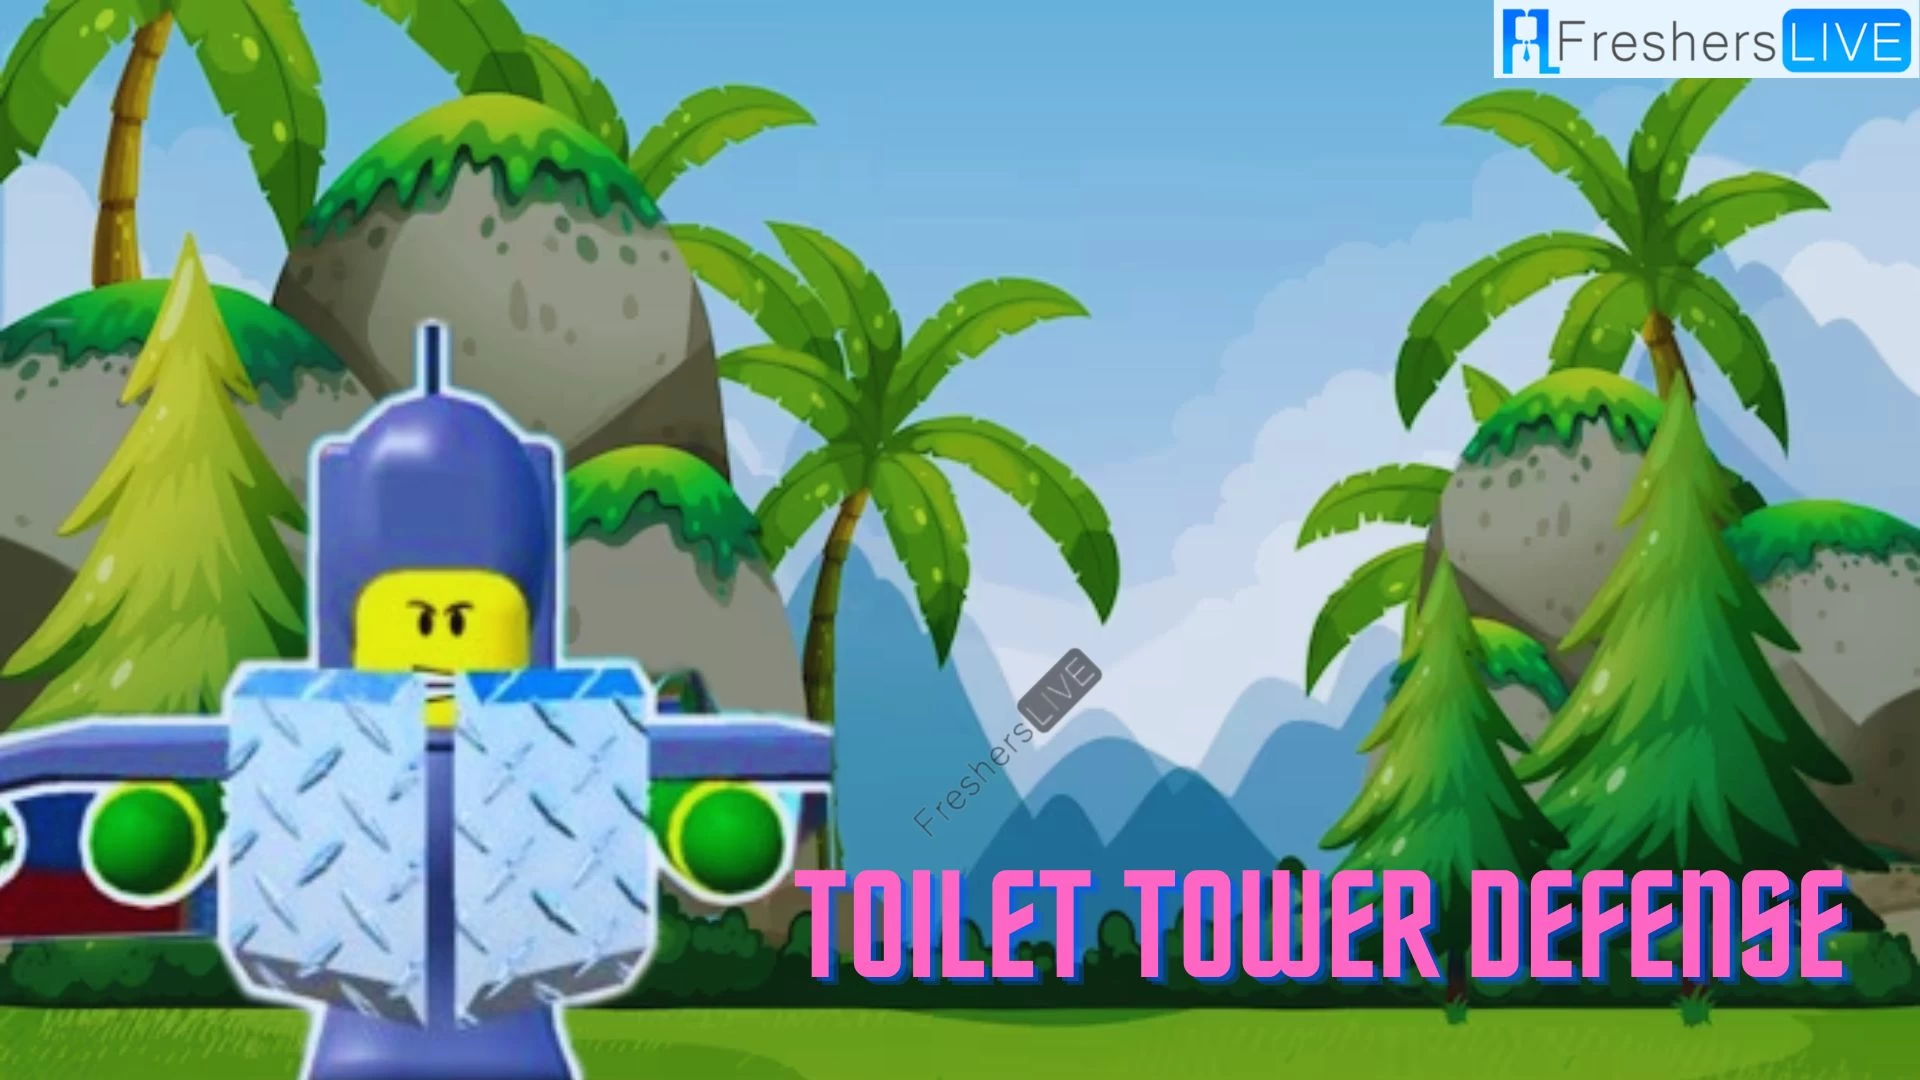 Is Toilet Tower Defense Coming Back? When is Toilet Tower Defense Coming Back?